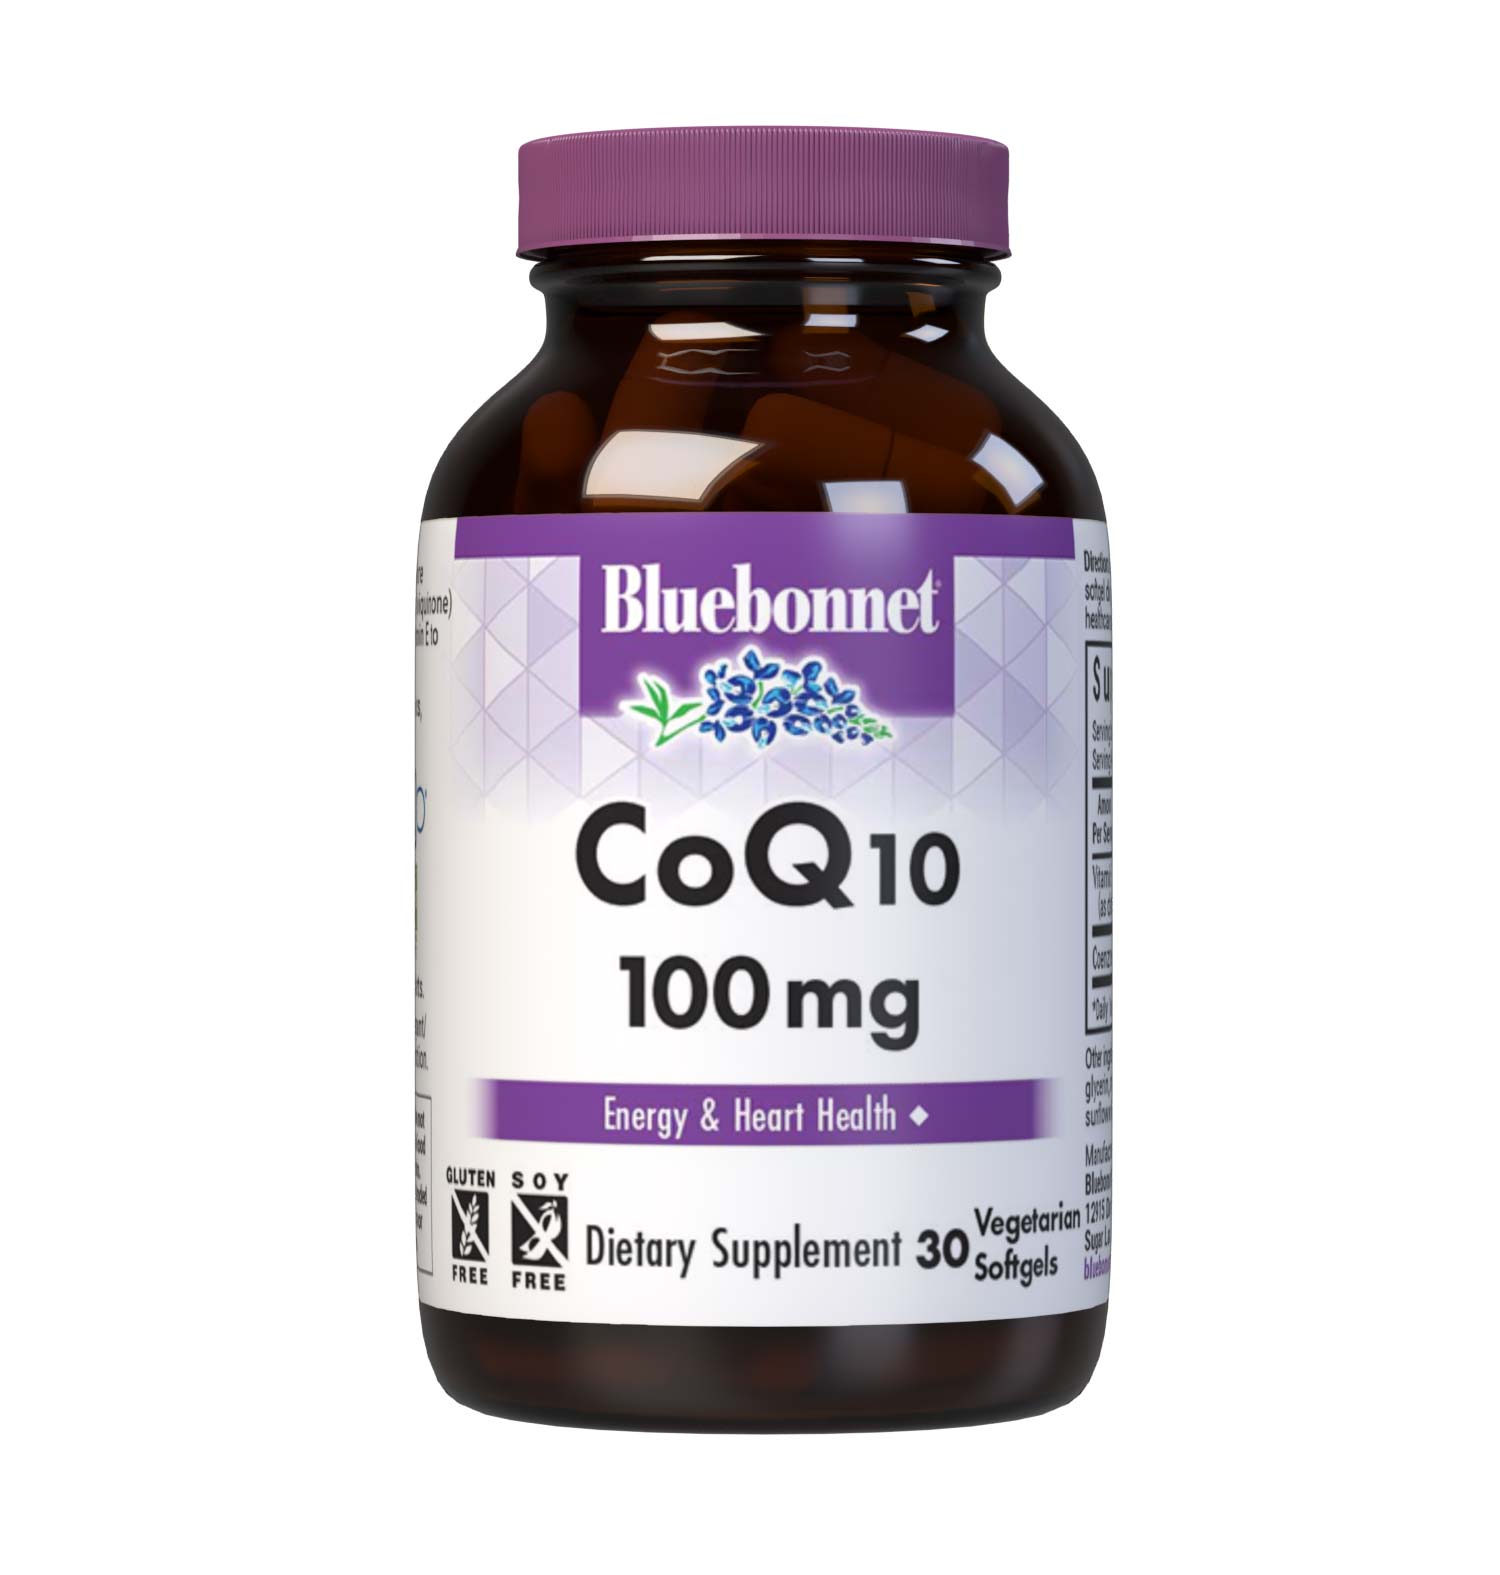 Bluebonnet’s CoQ10 30 mg 30 Vegetarian Softgels are formulated with the trans-isomer form of CoQ10 (ubiquinone) in a base of non-GMO sunflower oil along with vitamin E to support energy levels and cardiovascular health. #size_30 count